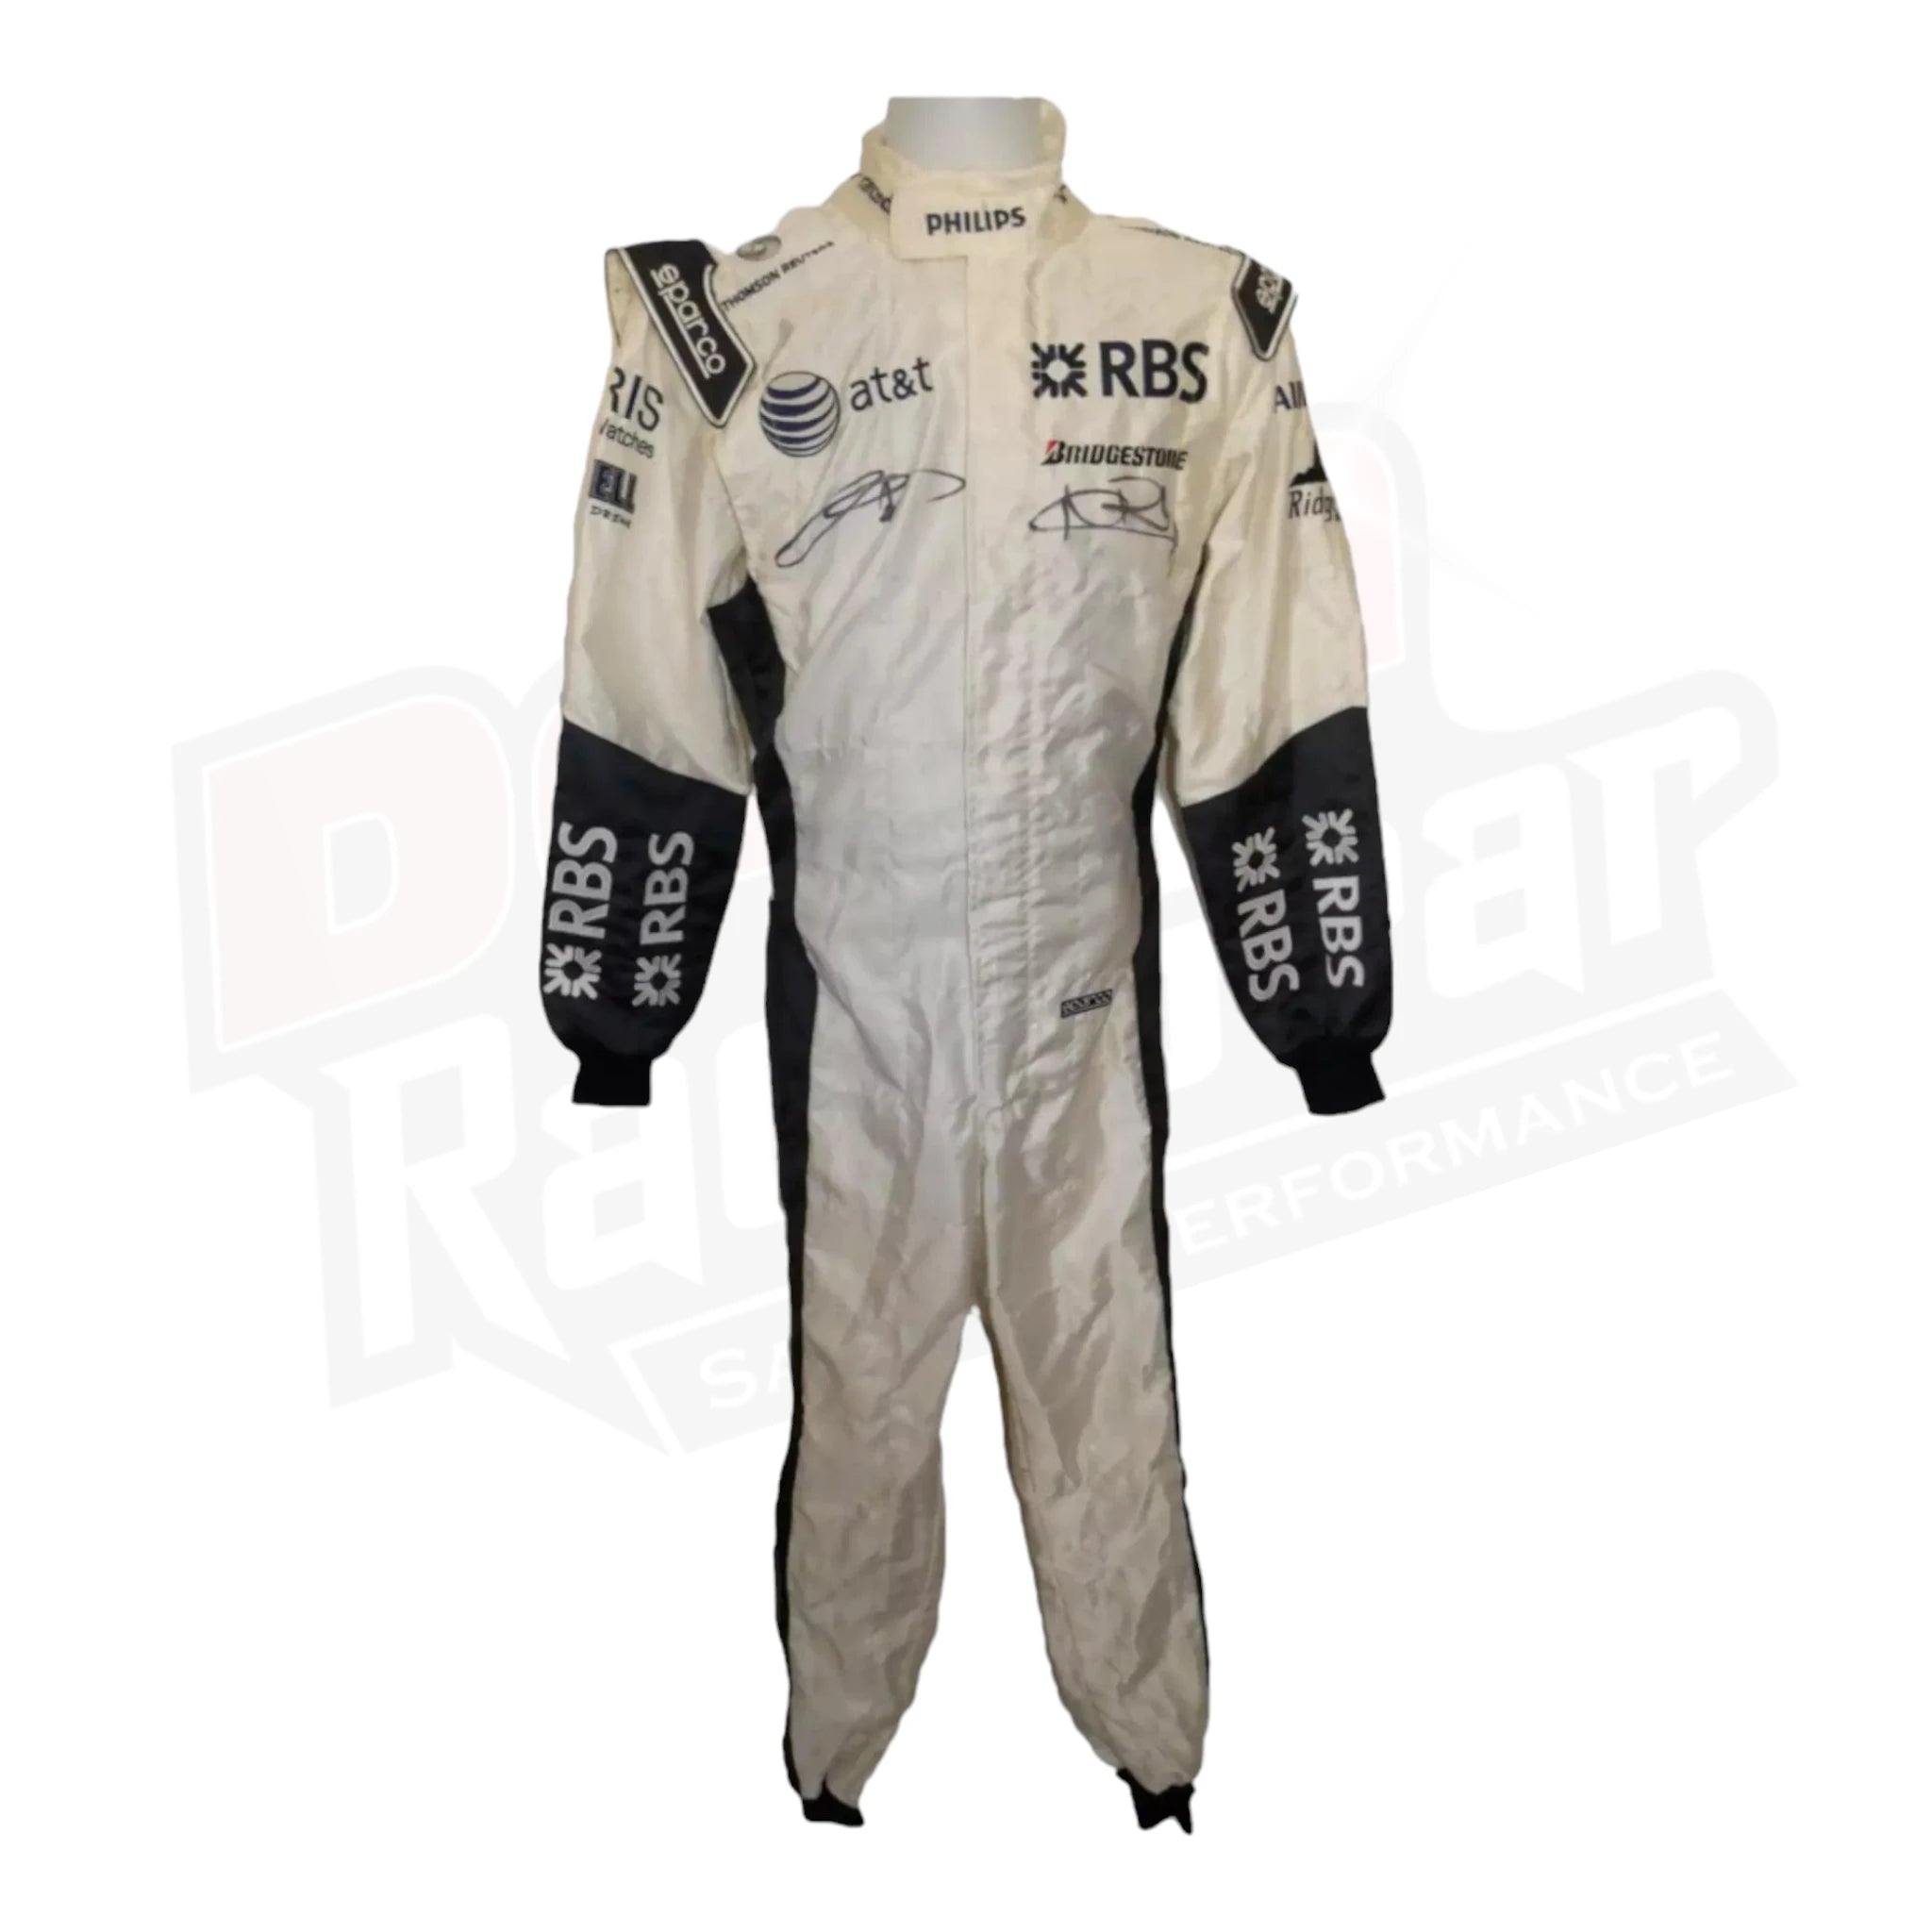 Williams 2009 driver promotional race suit signed by Rosberg and Nakajima